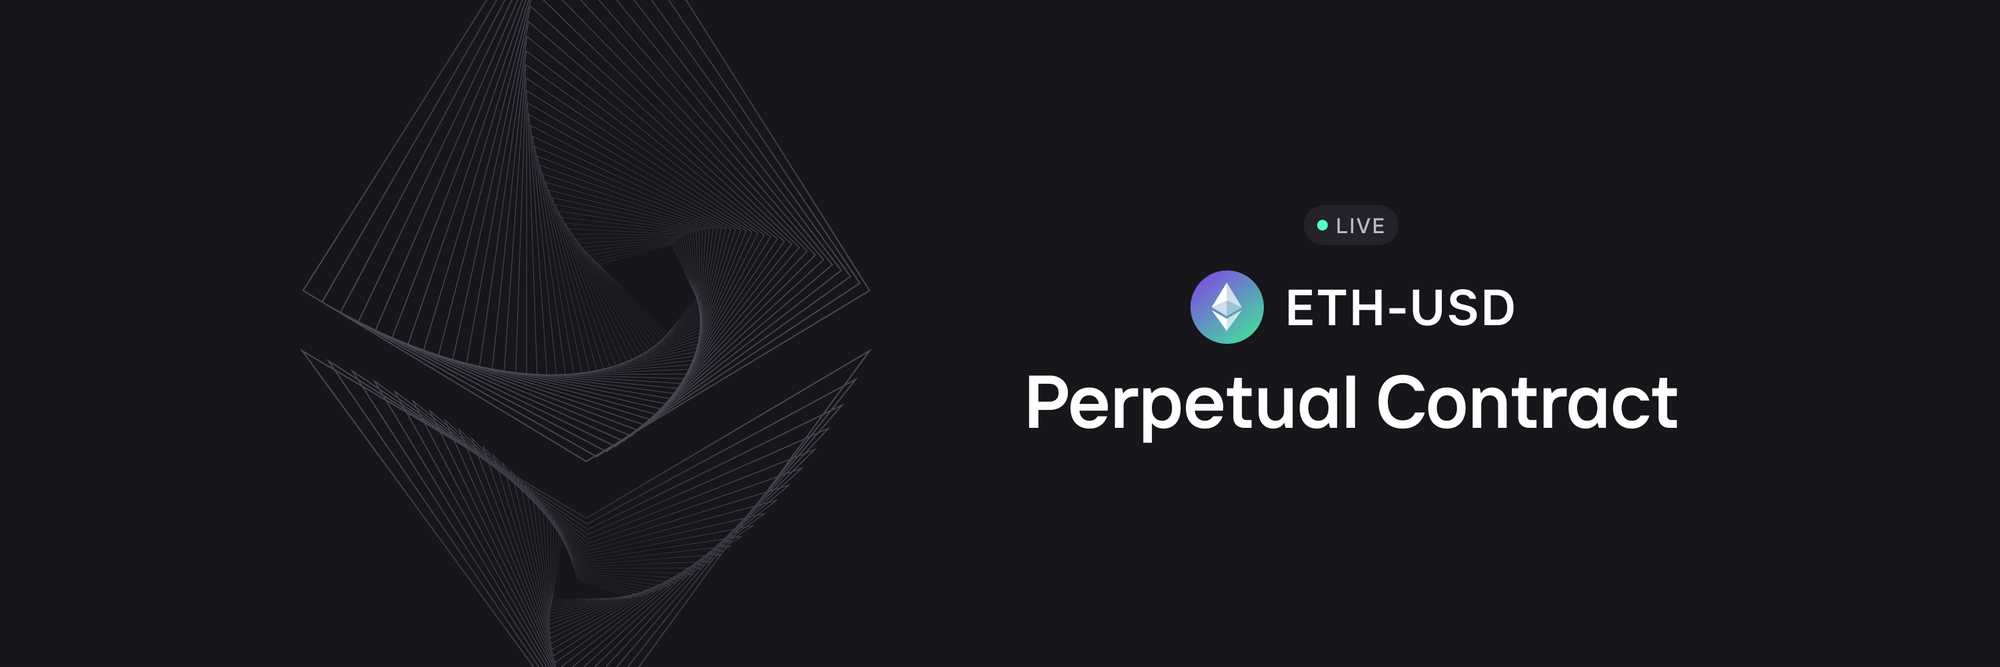 ETH-USD Perpetual Contract Market is Live